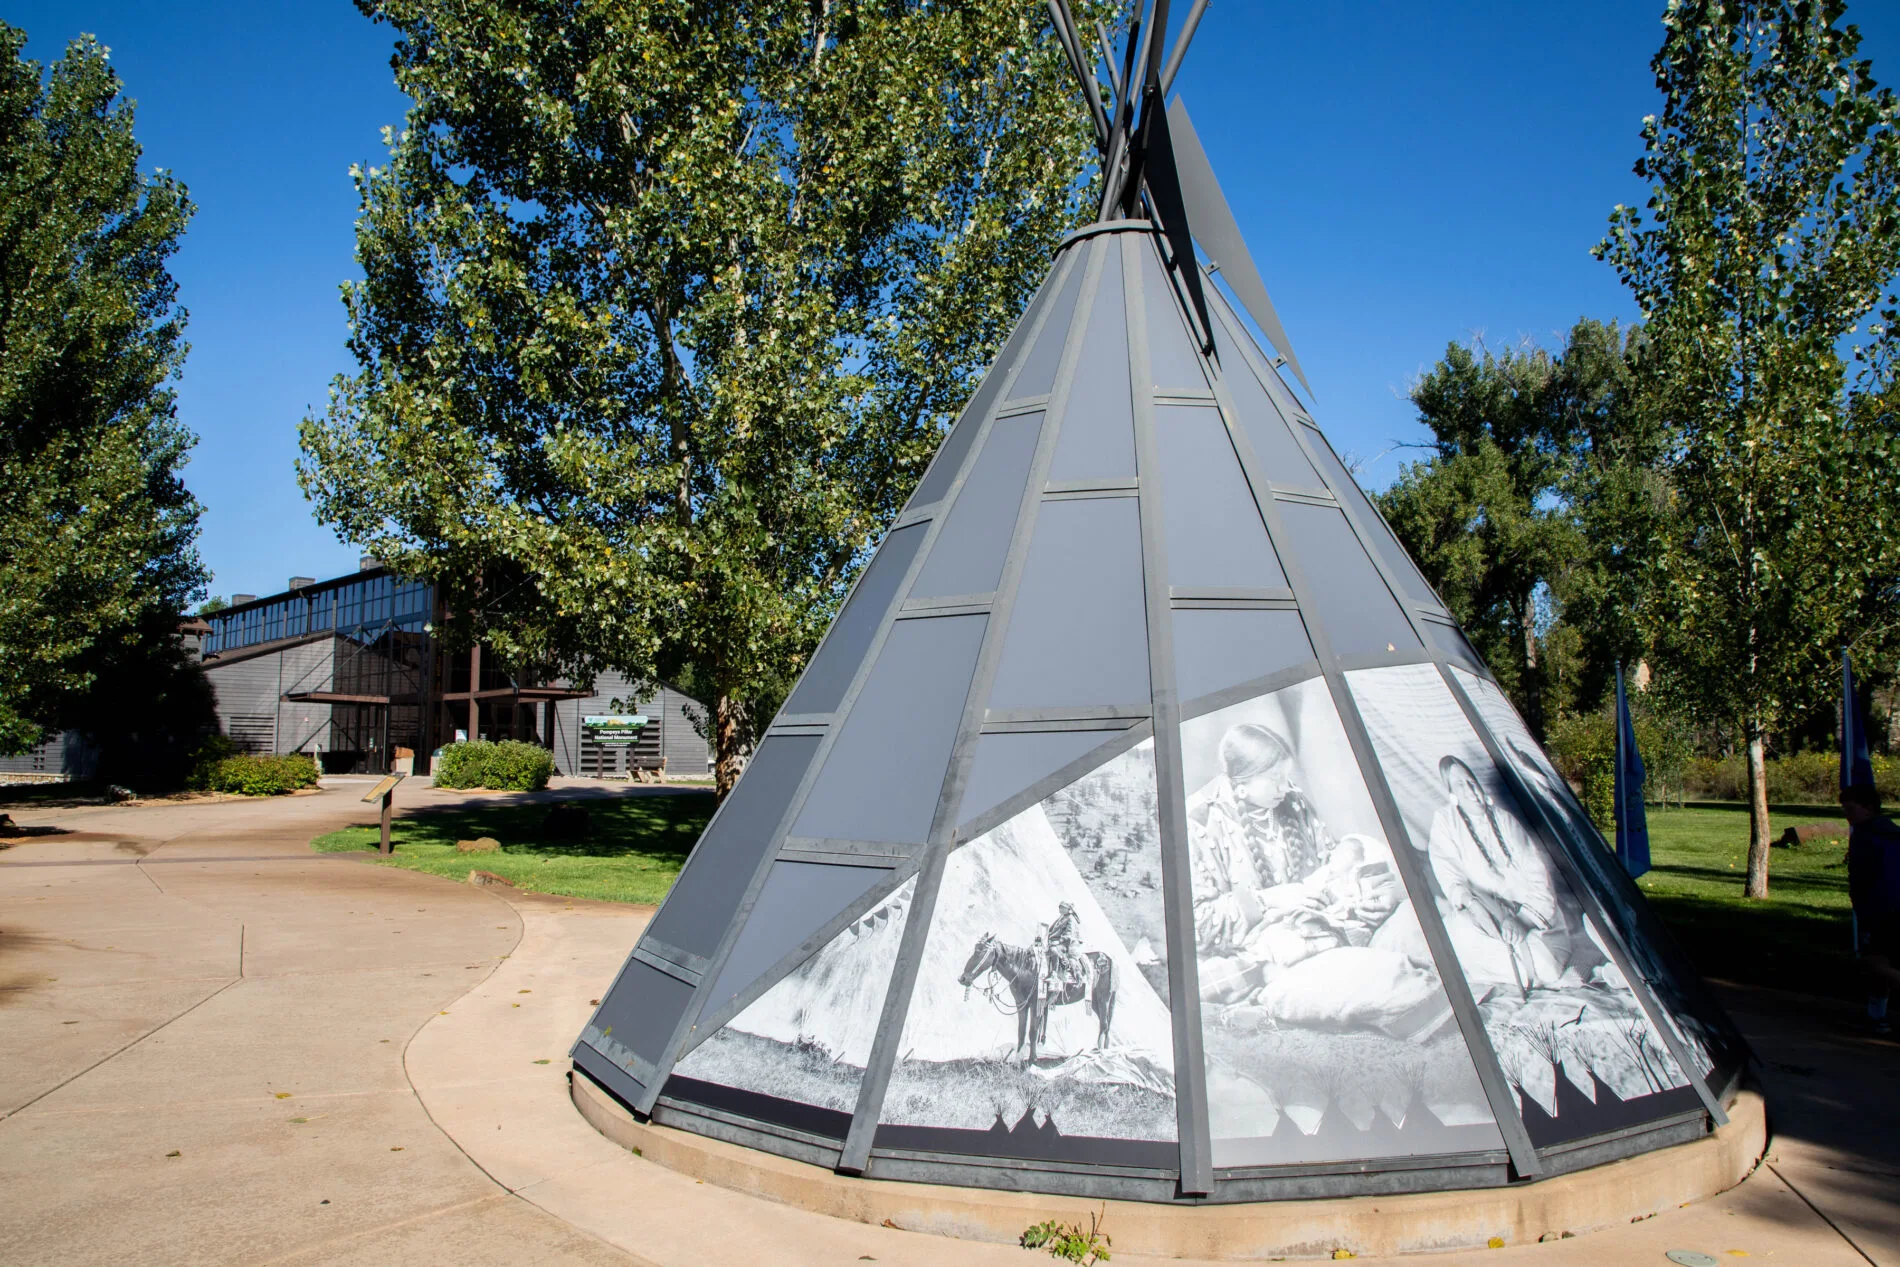 Glass teepee with photos of Native Americans.